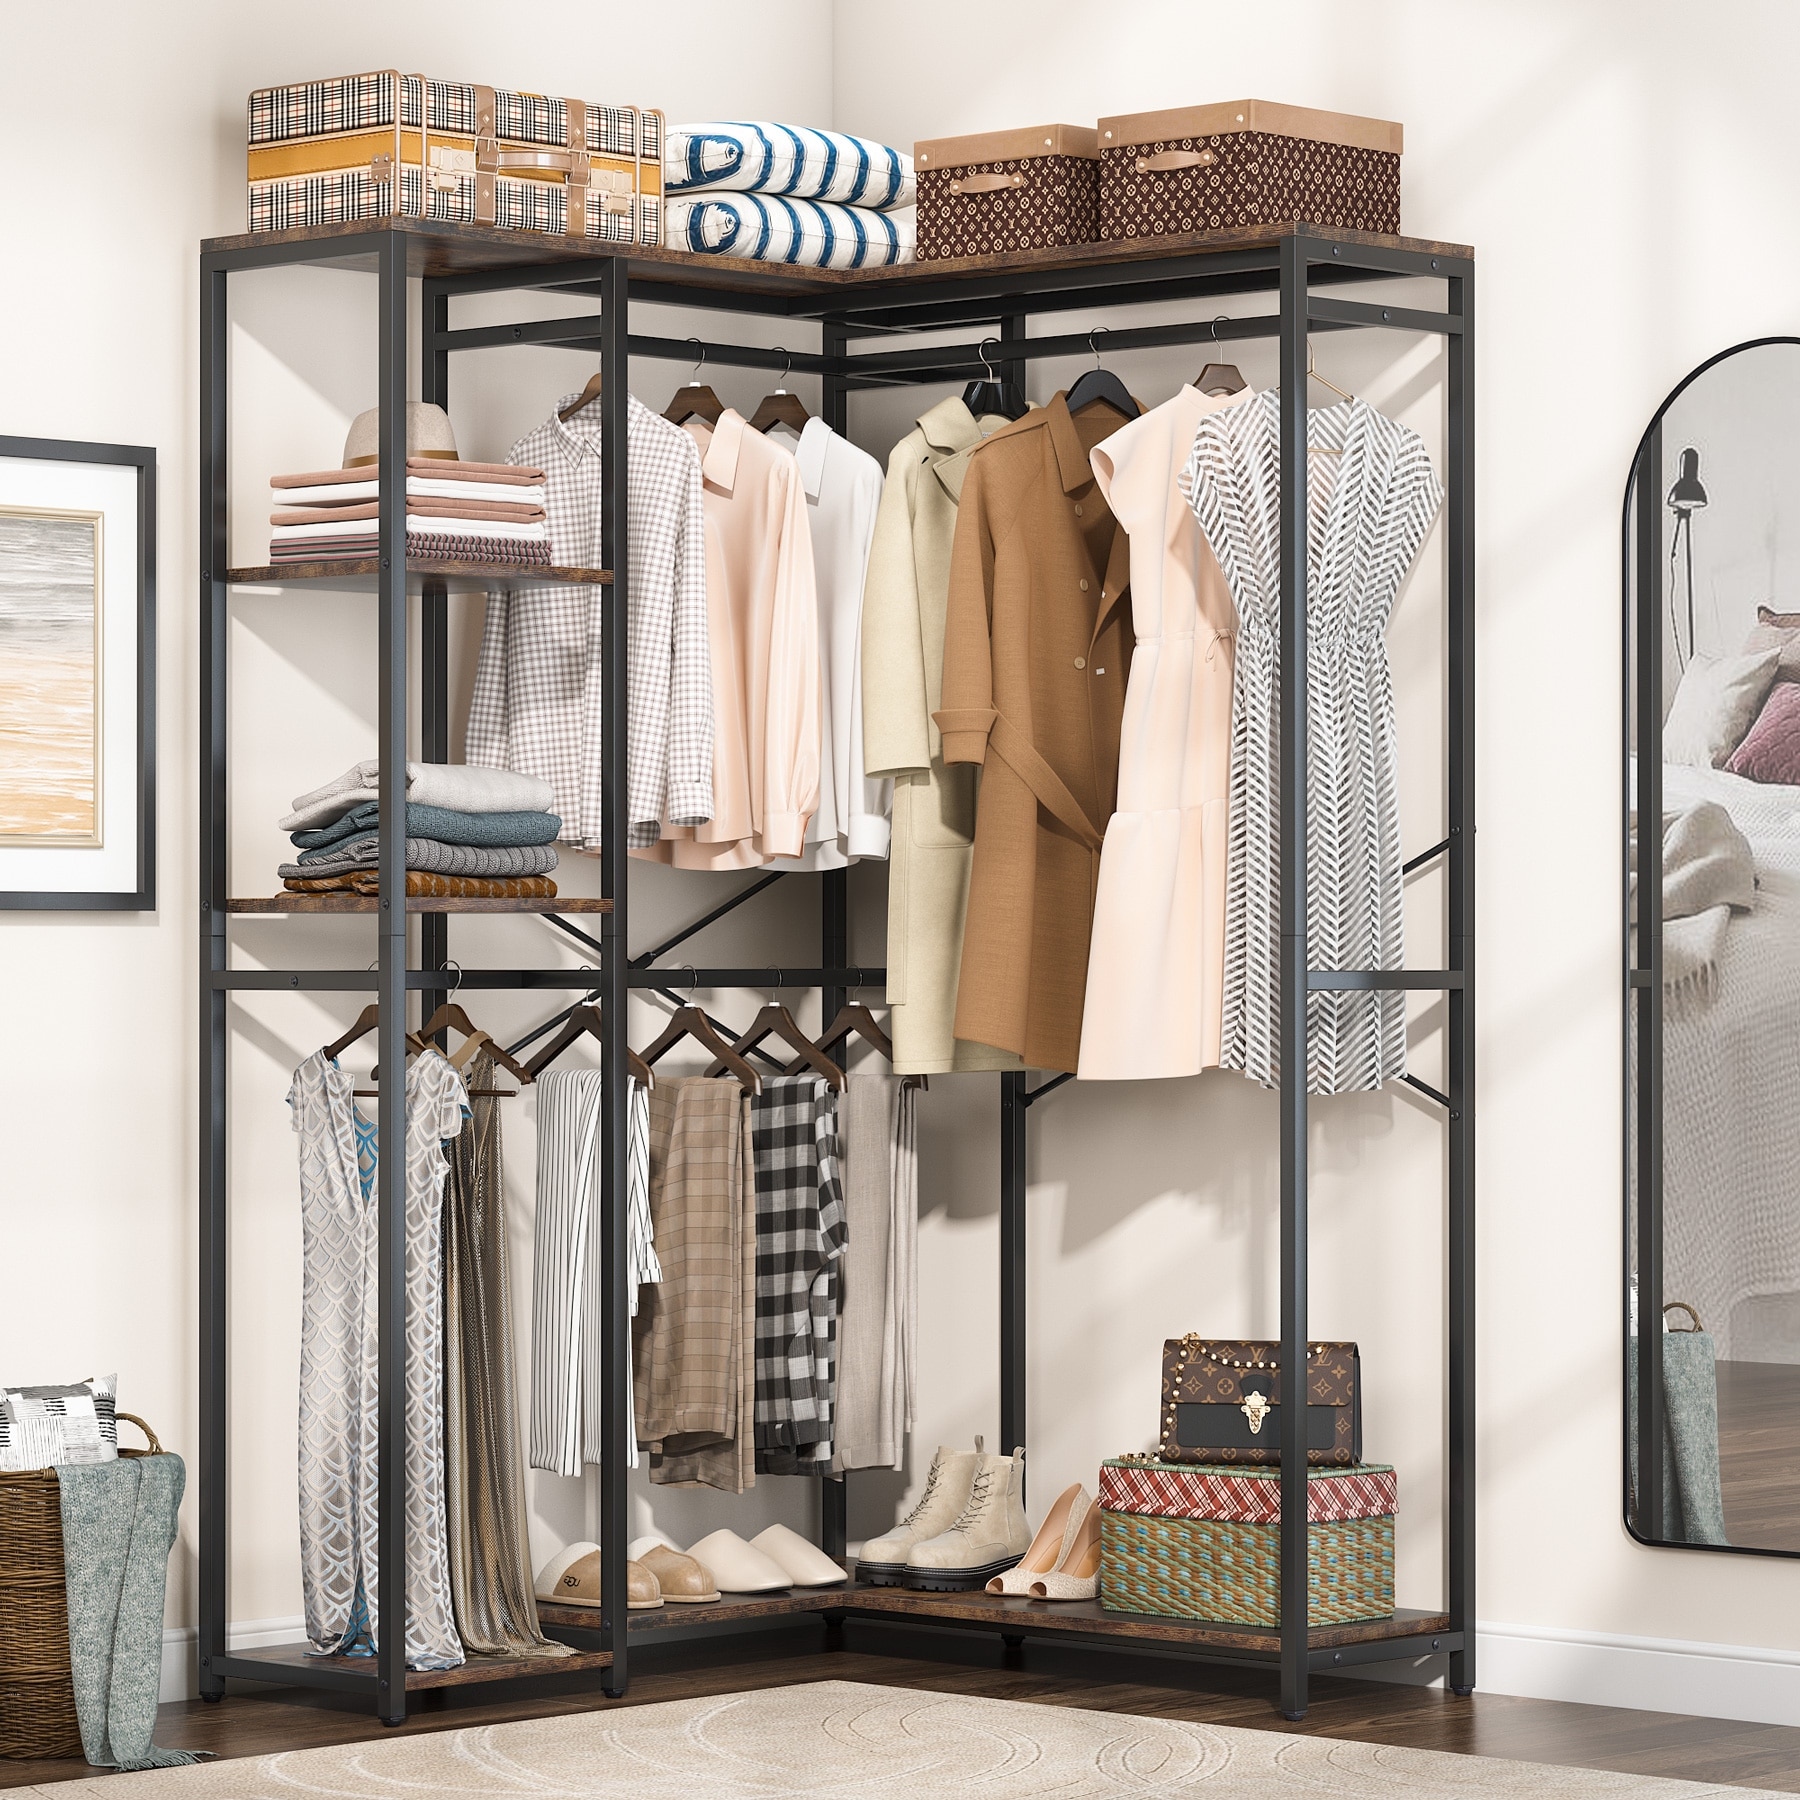 https://ak1.ostkcdn.com/images/products/is/images/direct/89f462eef9e1ecdfb2584606168a2f0e1bca14c0/47.24%22-W-Closet-Corner-System%2CFreestanding-L-Shape-Closet-Organizer%2C-4-Tier-Clothing-Garment-Rack-with-4-Hanging-Rods.jpg